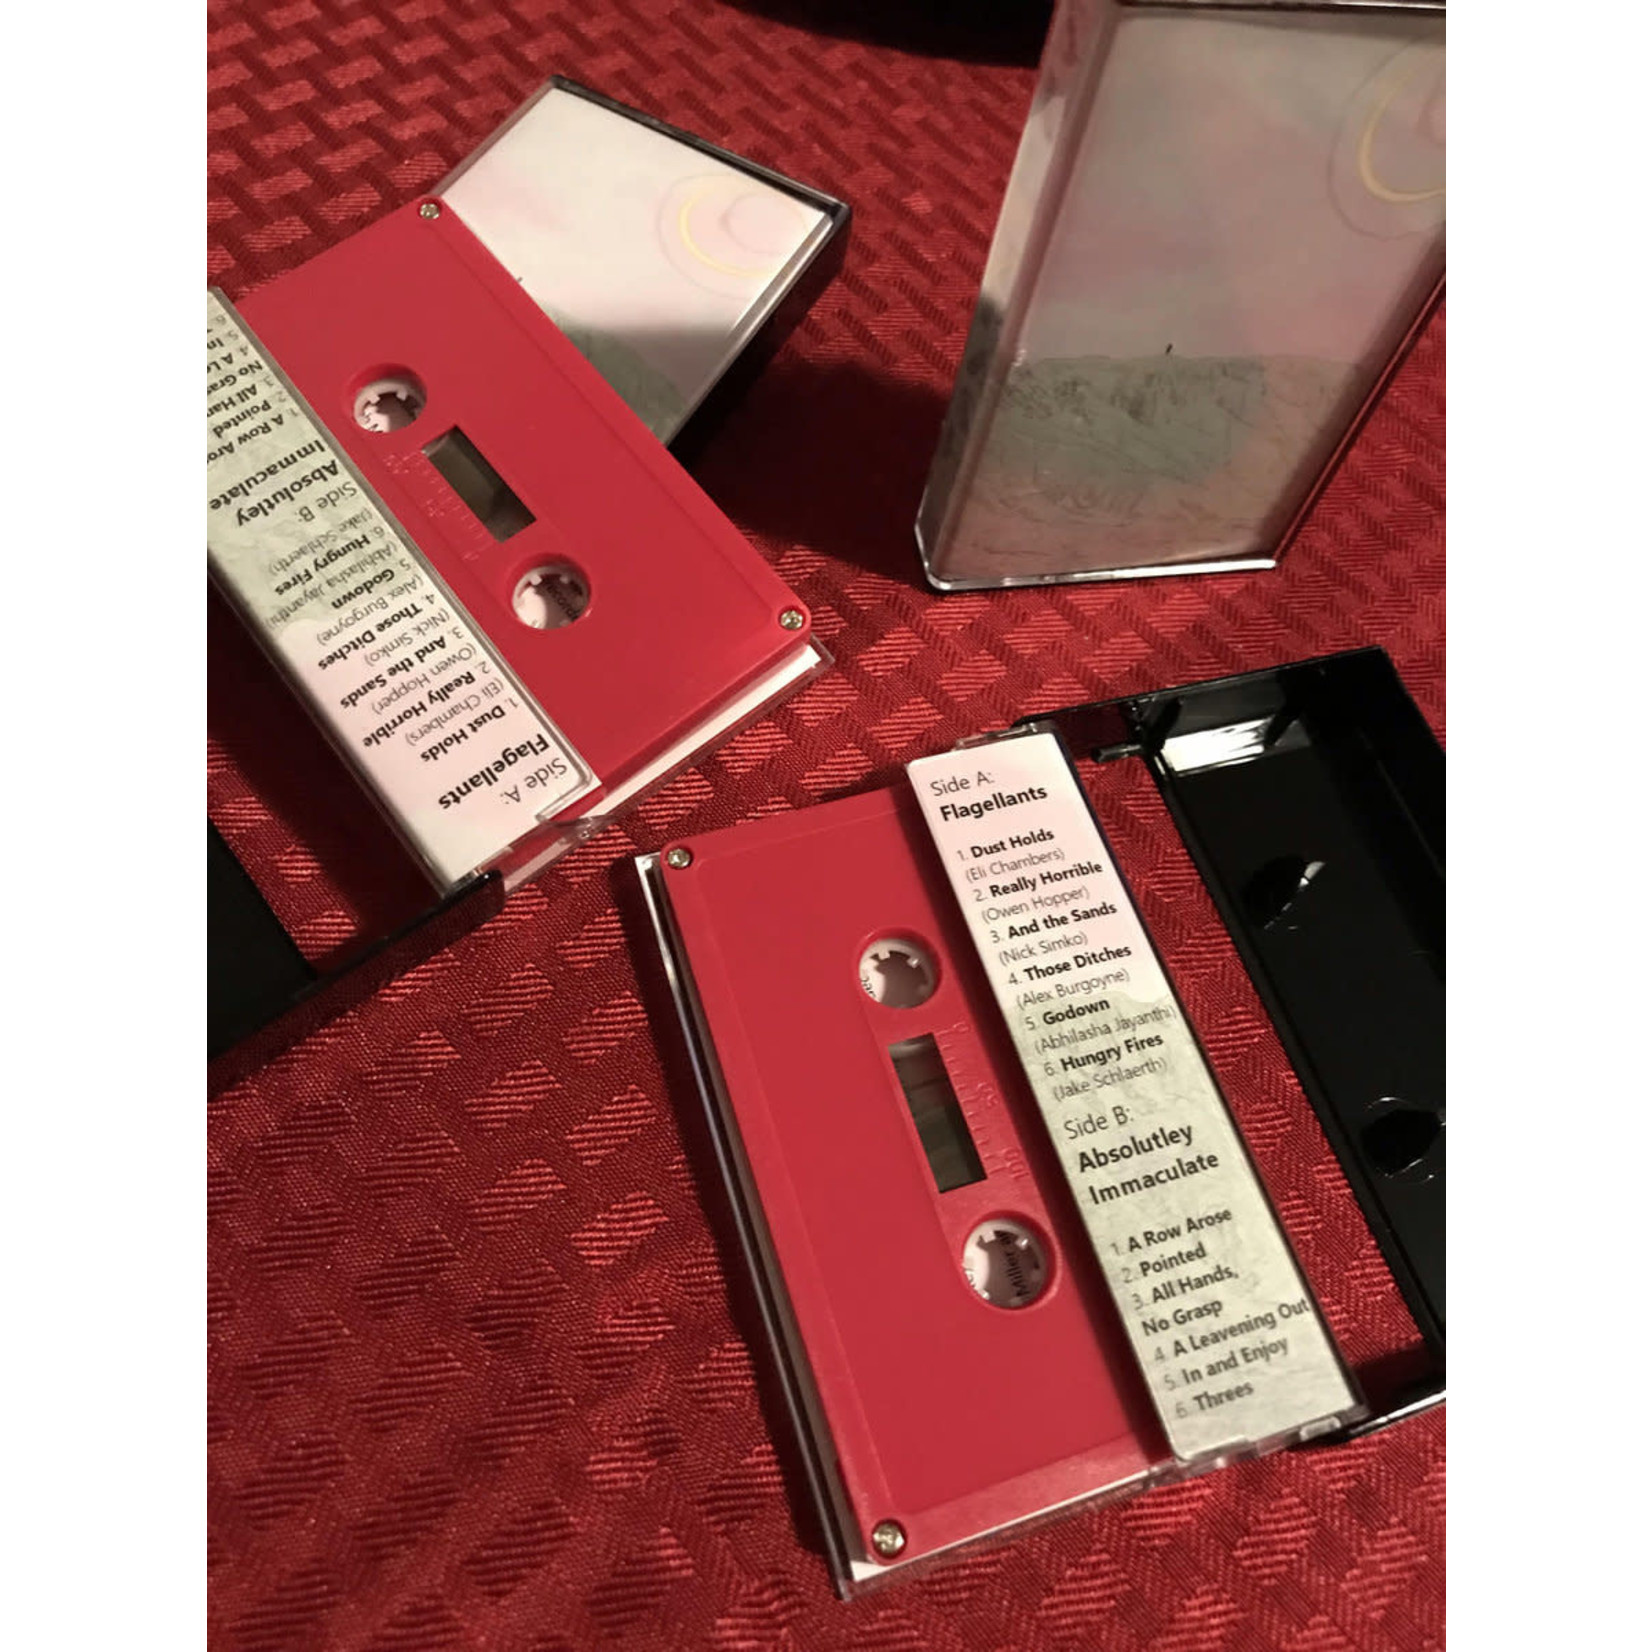 Sun Trash - Flagellants / Absolutely Immaculate (Tape)